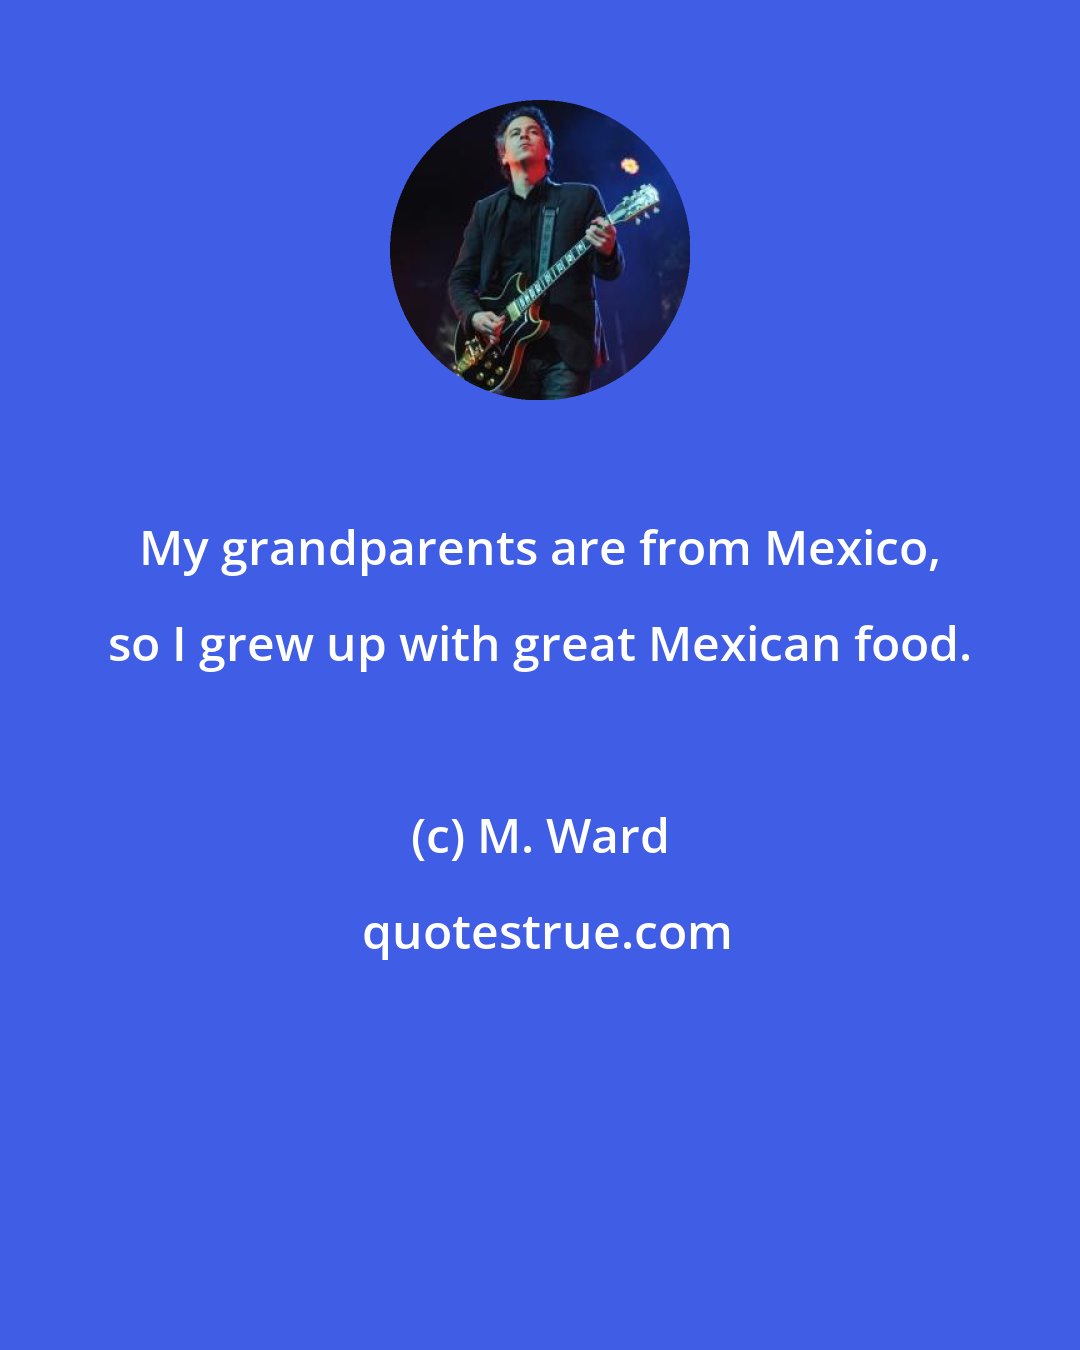 M. Ward: My grandparents are from Mexico, so I grew up with great Mexican food.